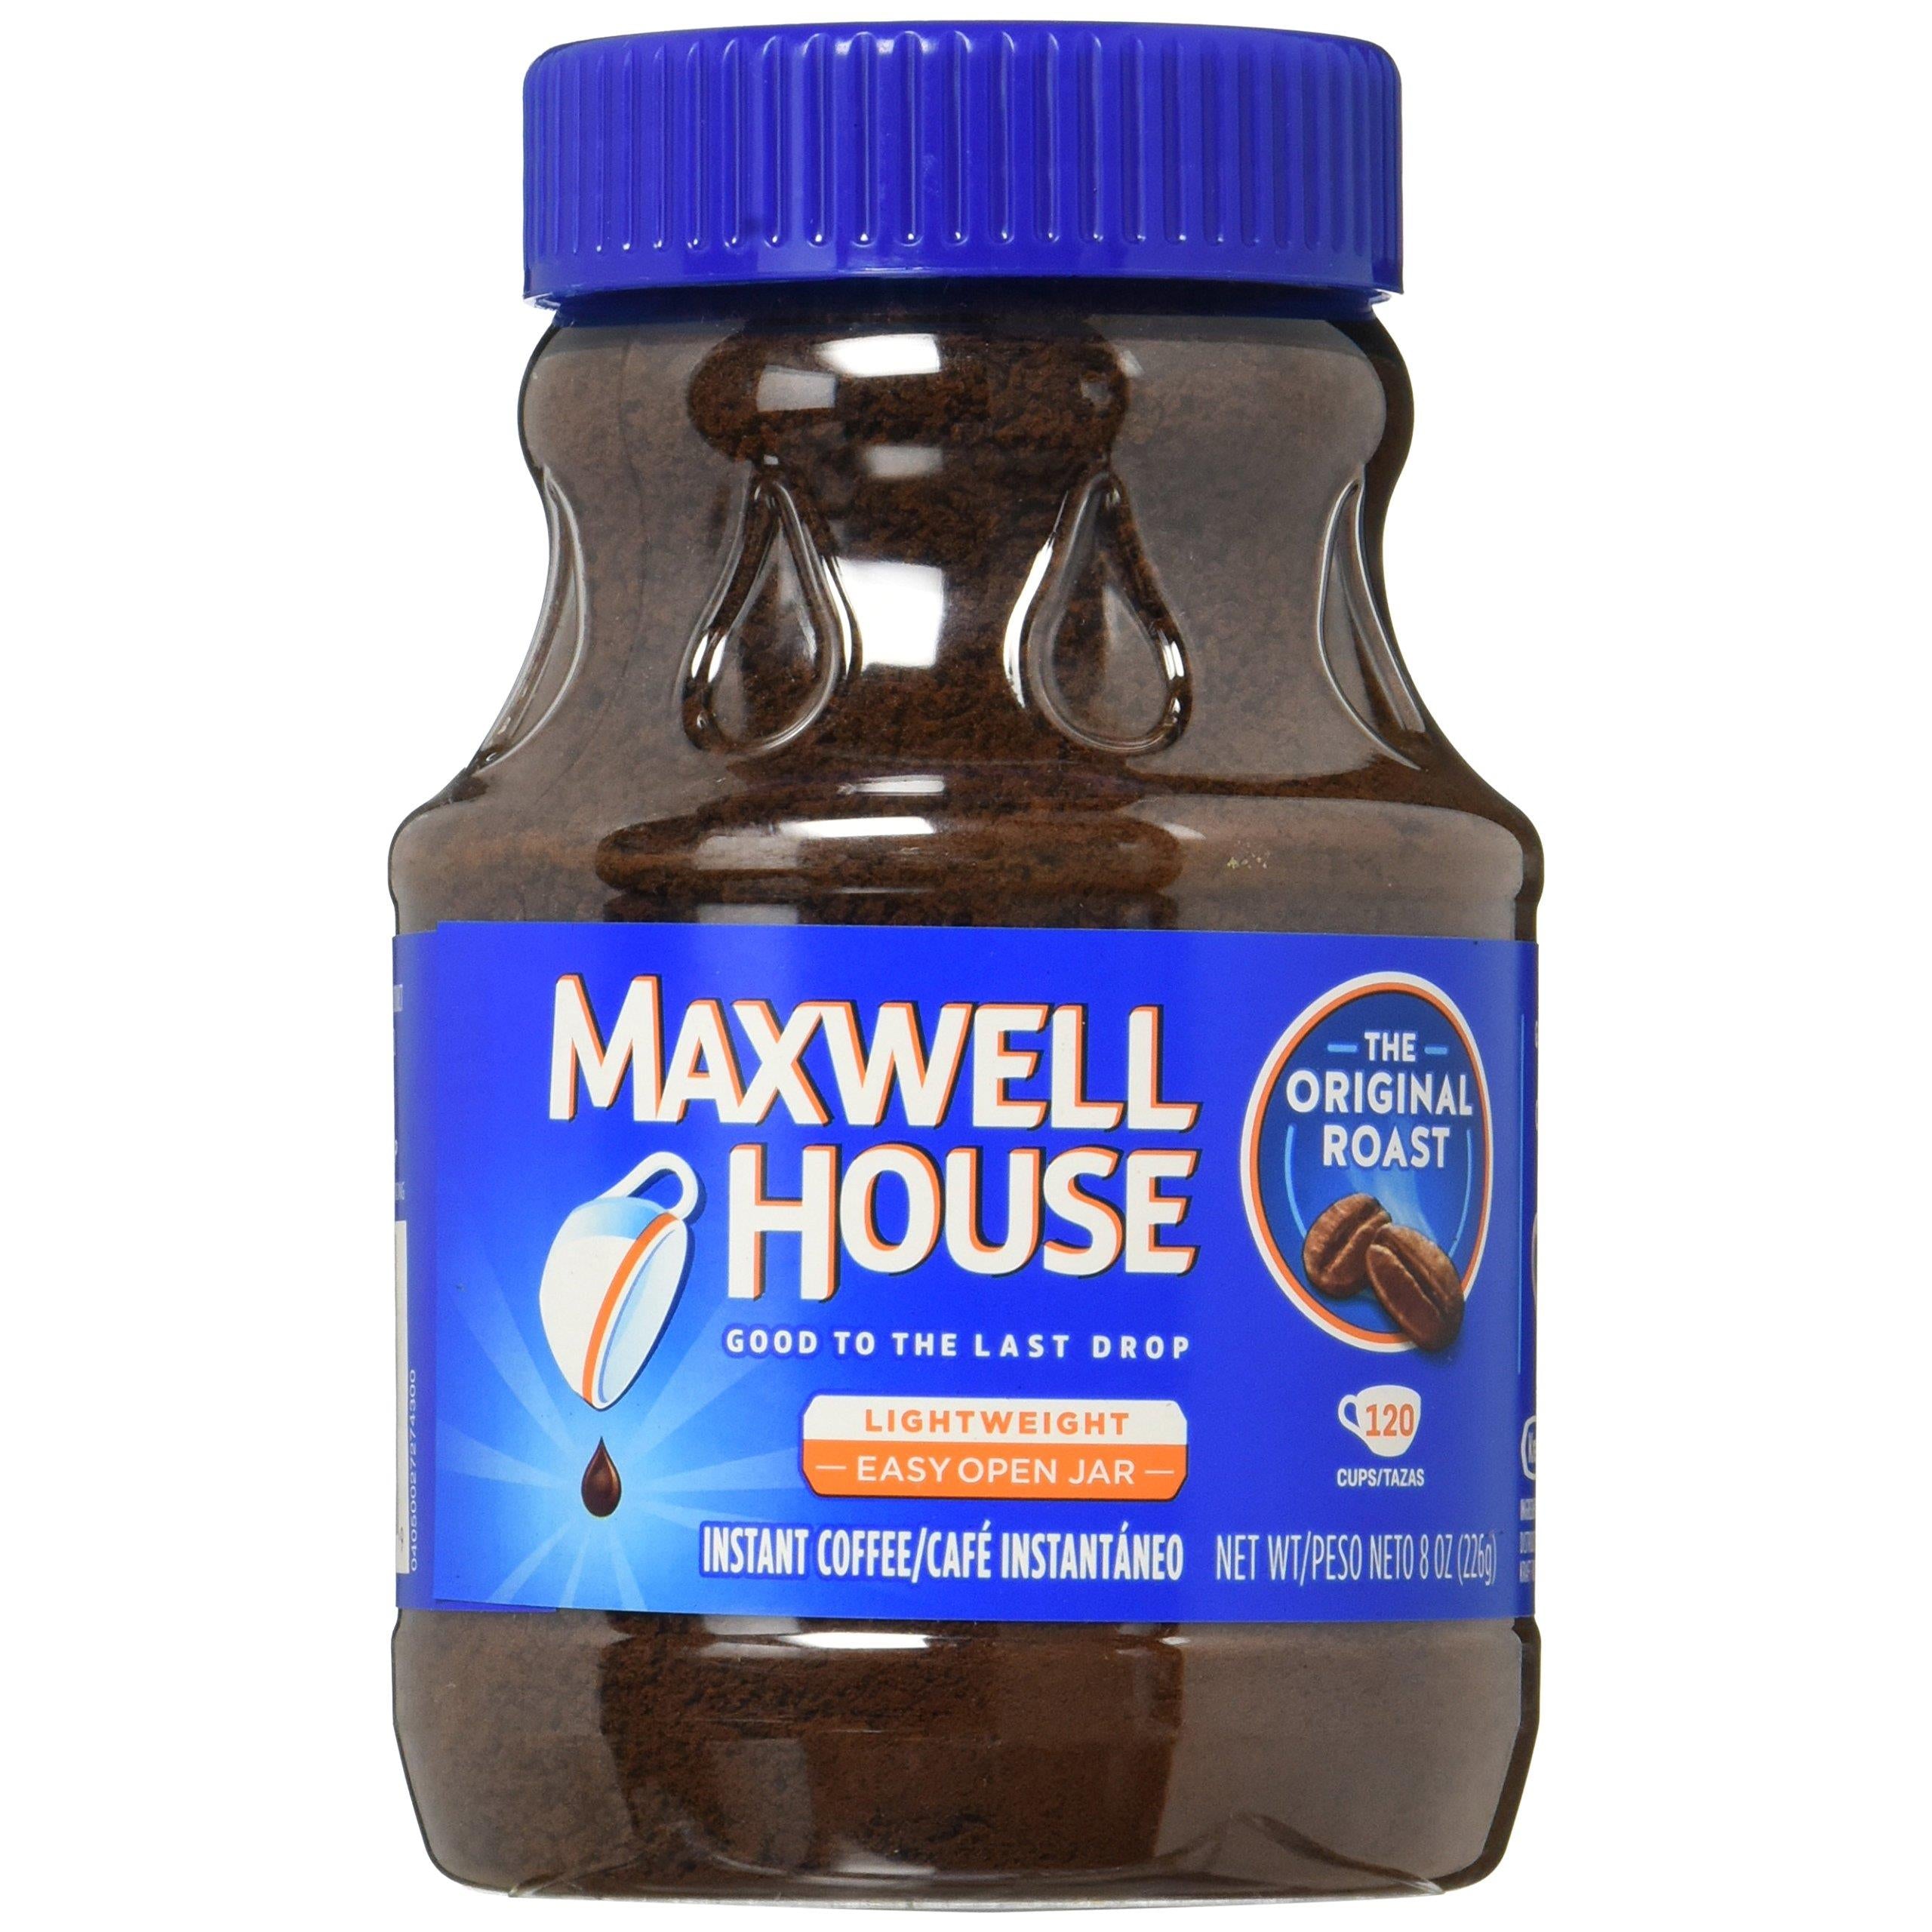 Maxwell House Original Roast Coffee Blend (8oz Canister, Pack of 3)